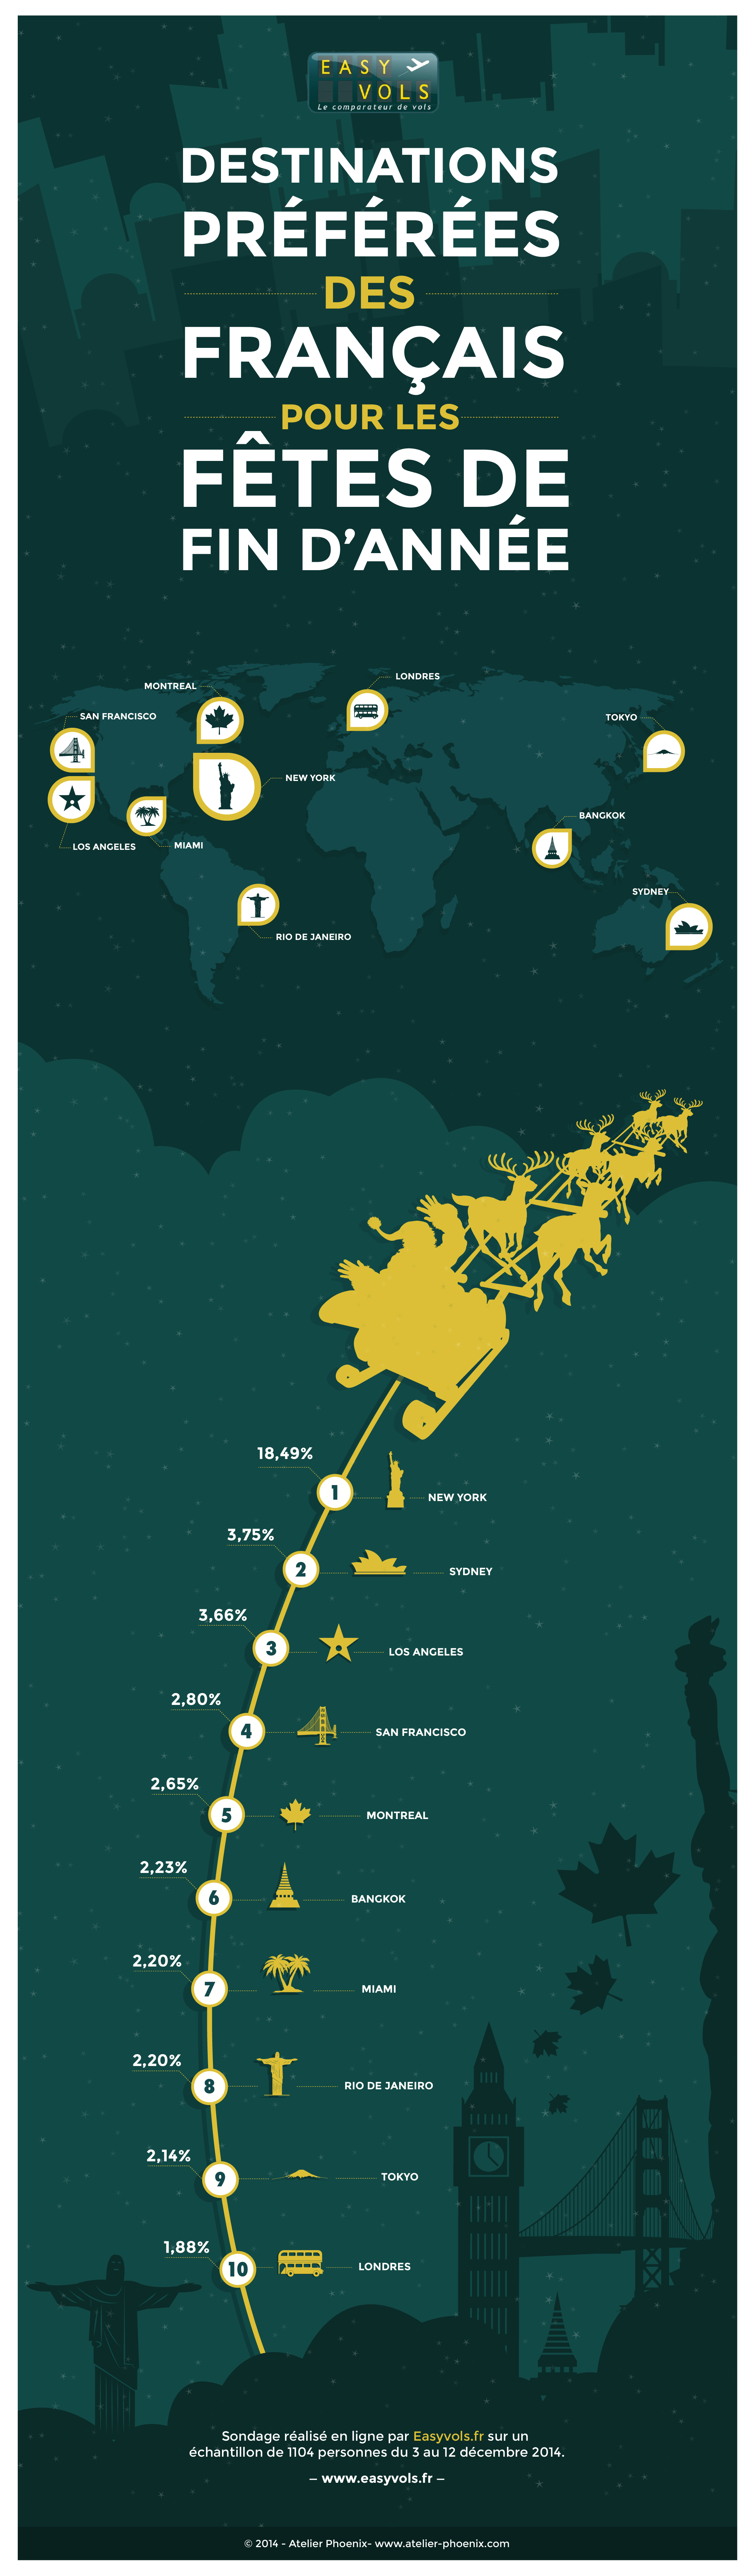 Easyvoyage_infographic_VDef